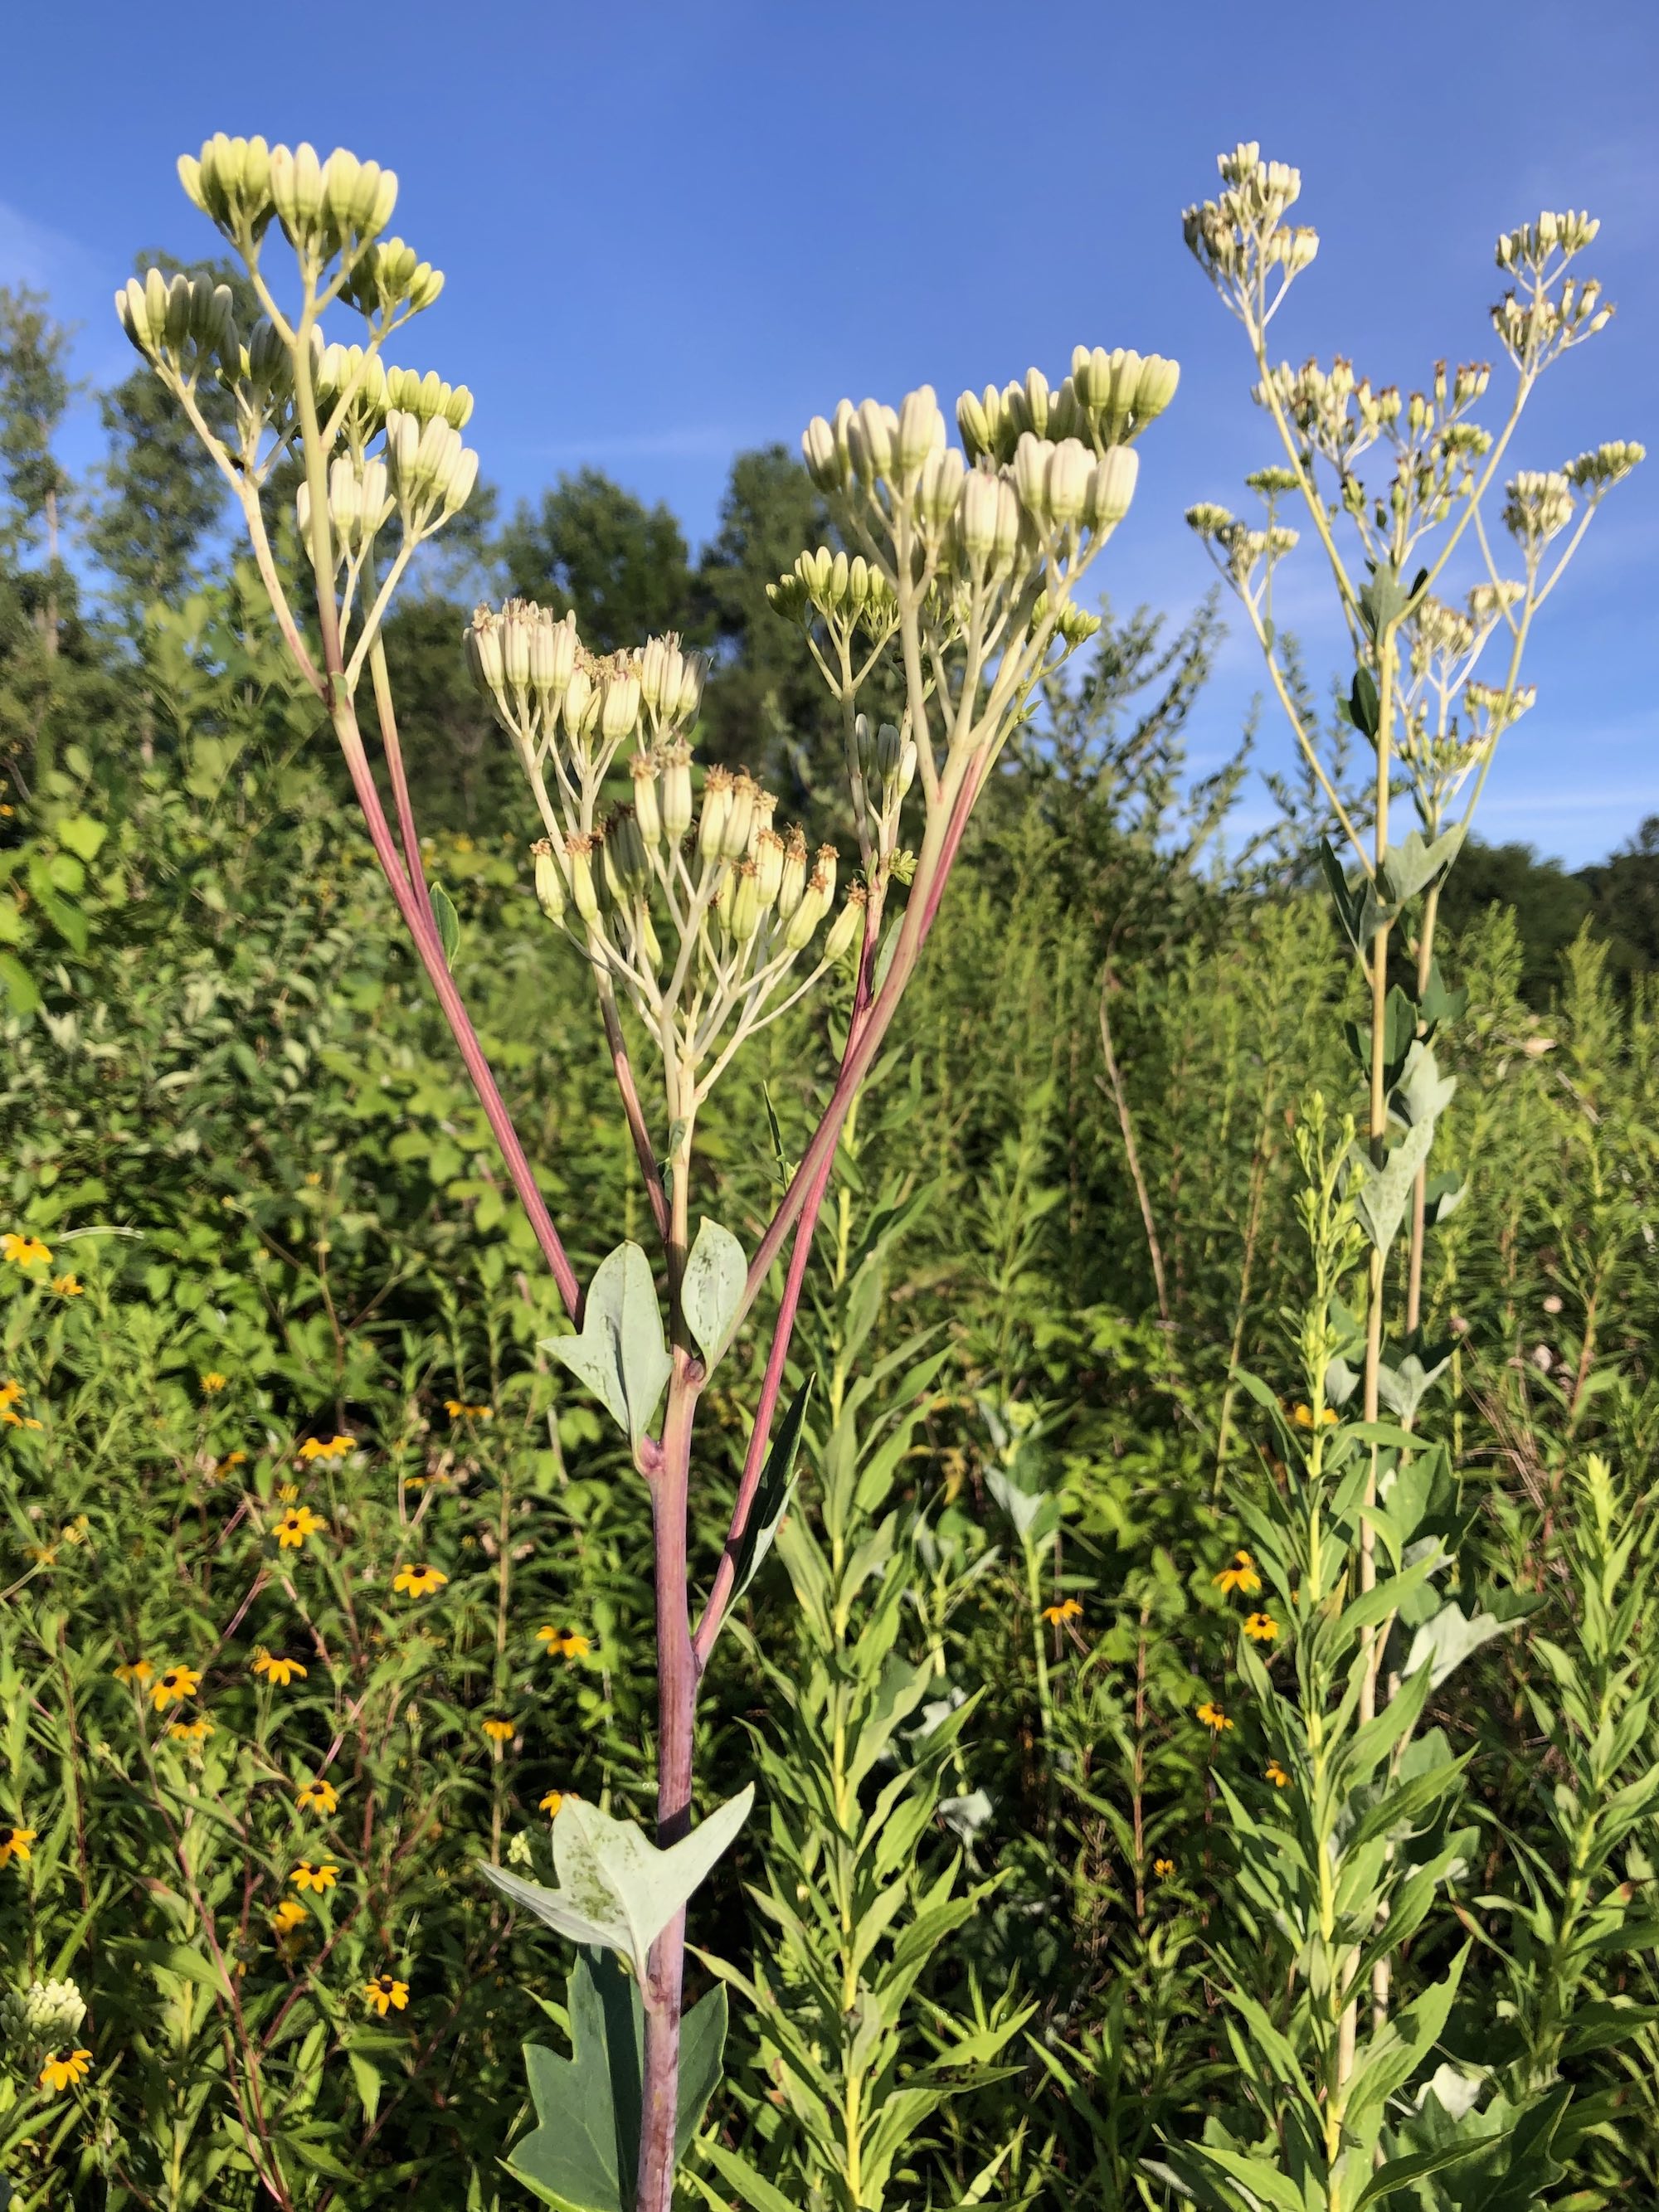 Pale Indian Plantain in Marion Dunn Prairie in Madison, Wisconsin on July 31, 2020.